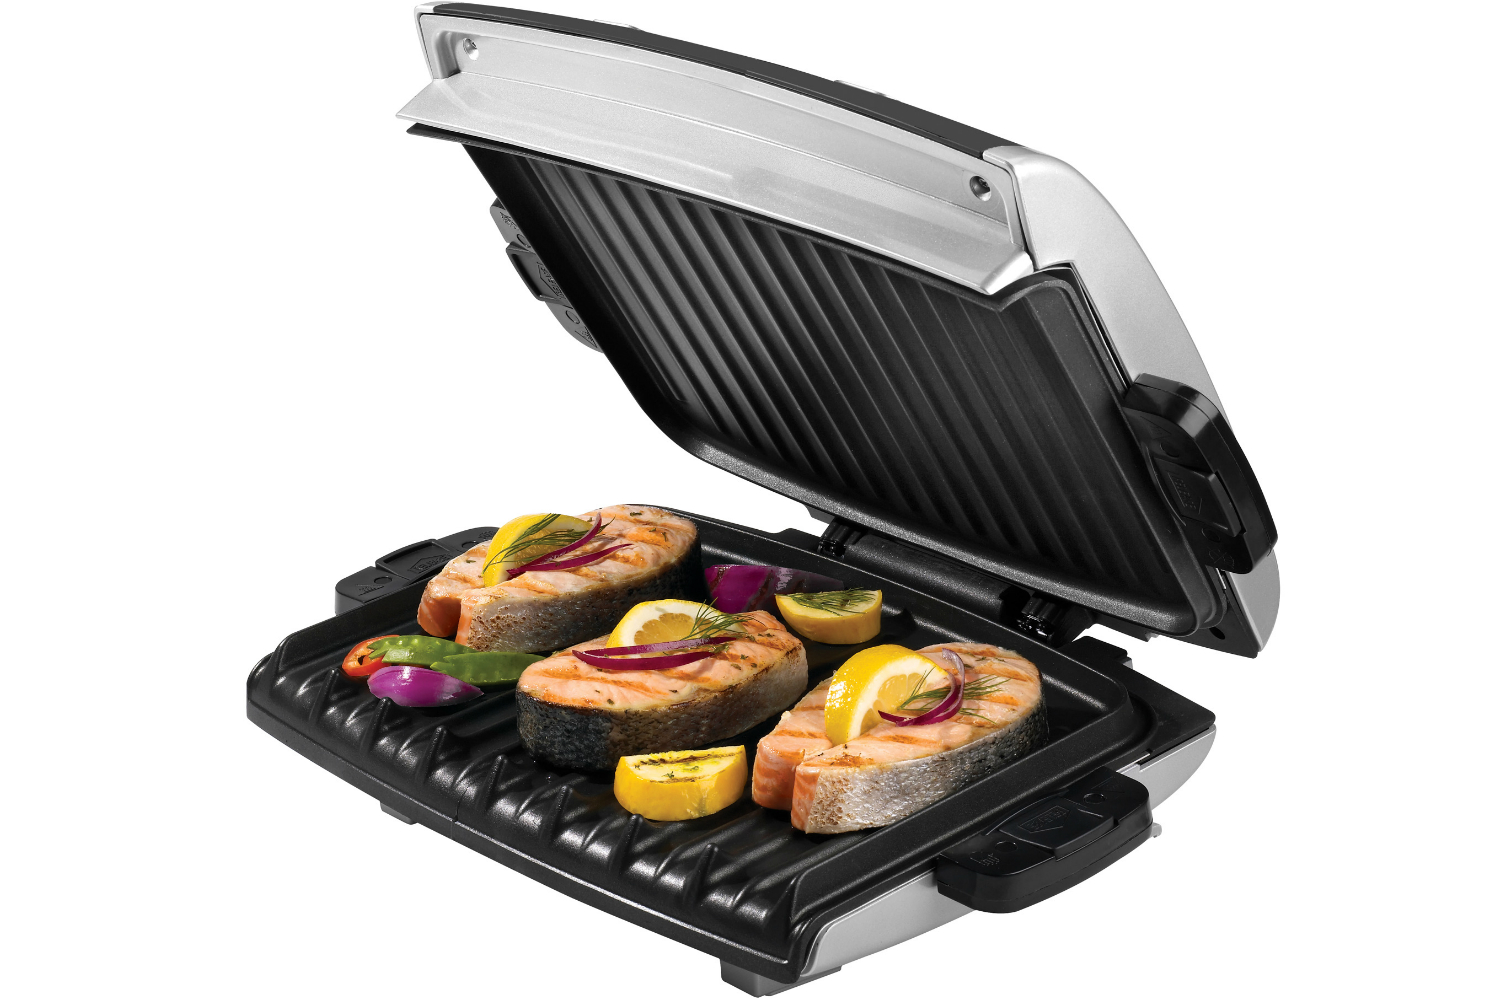 https://www.digitaltrends.com/wp-content/uploads/2019/05/george-foreman-6-serving-removable-plate-electric-grill-and-panini-press-2.jpg?p=1